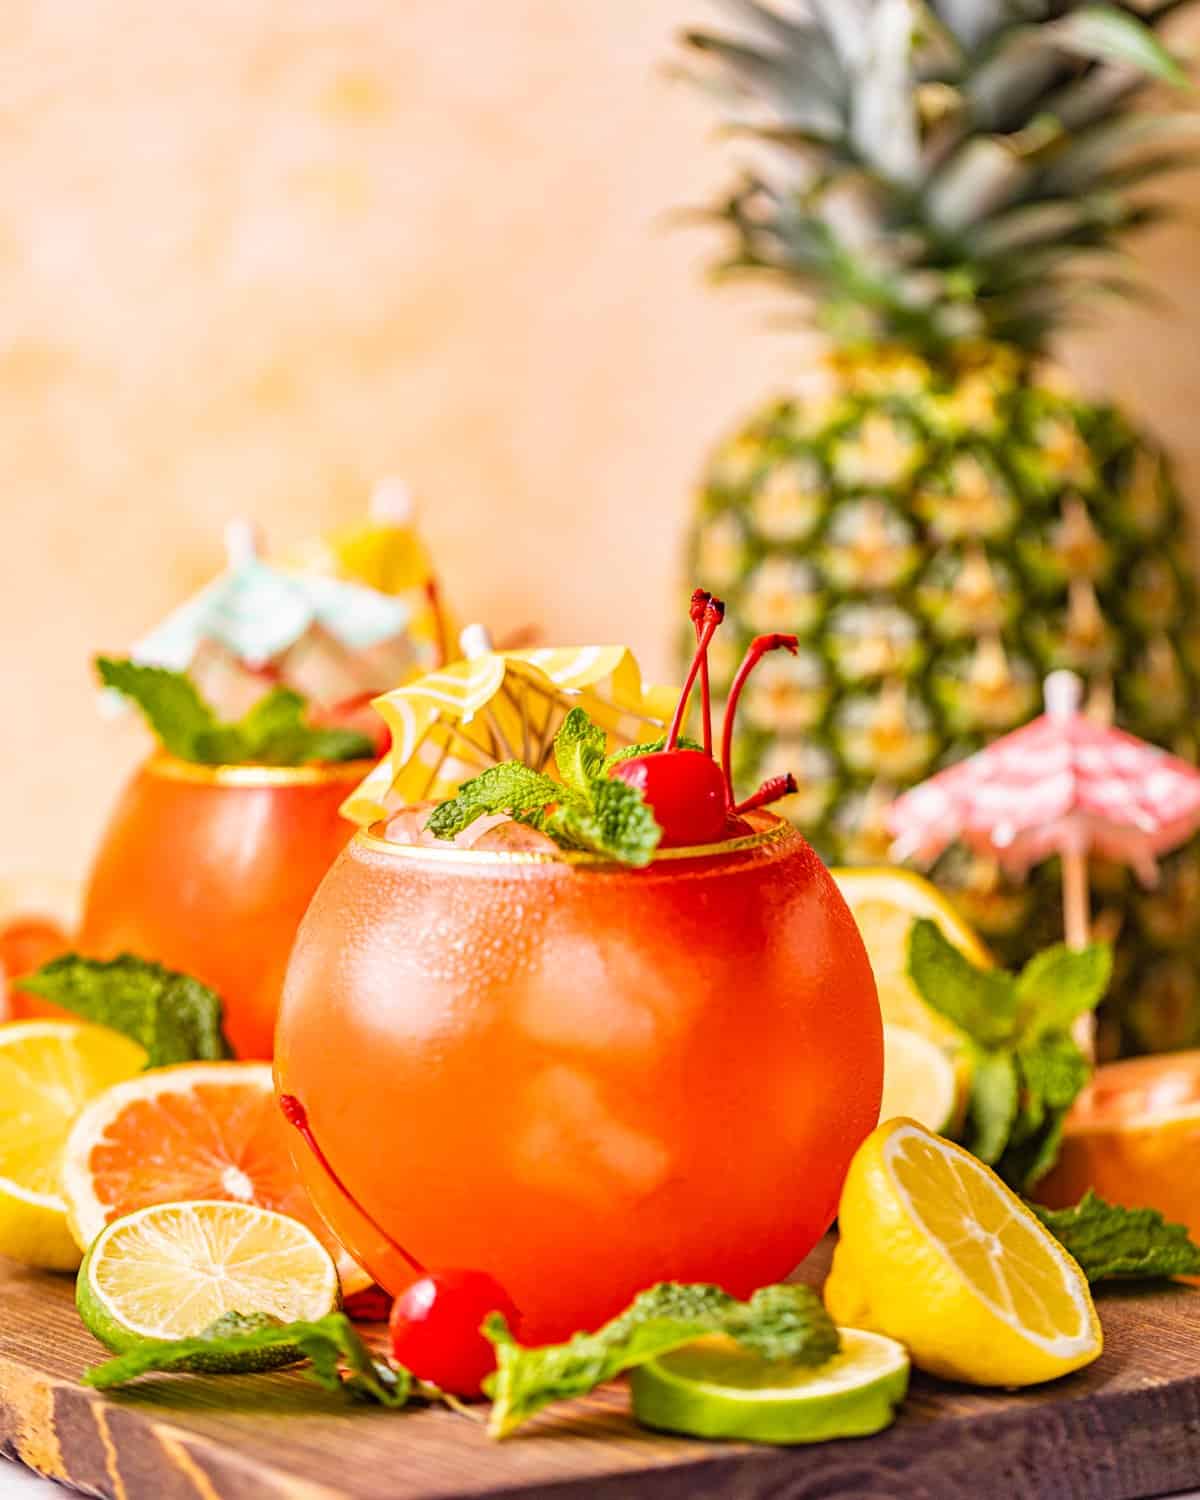 bahama mama cocktail on a brown tray with sliced lemons and limes